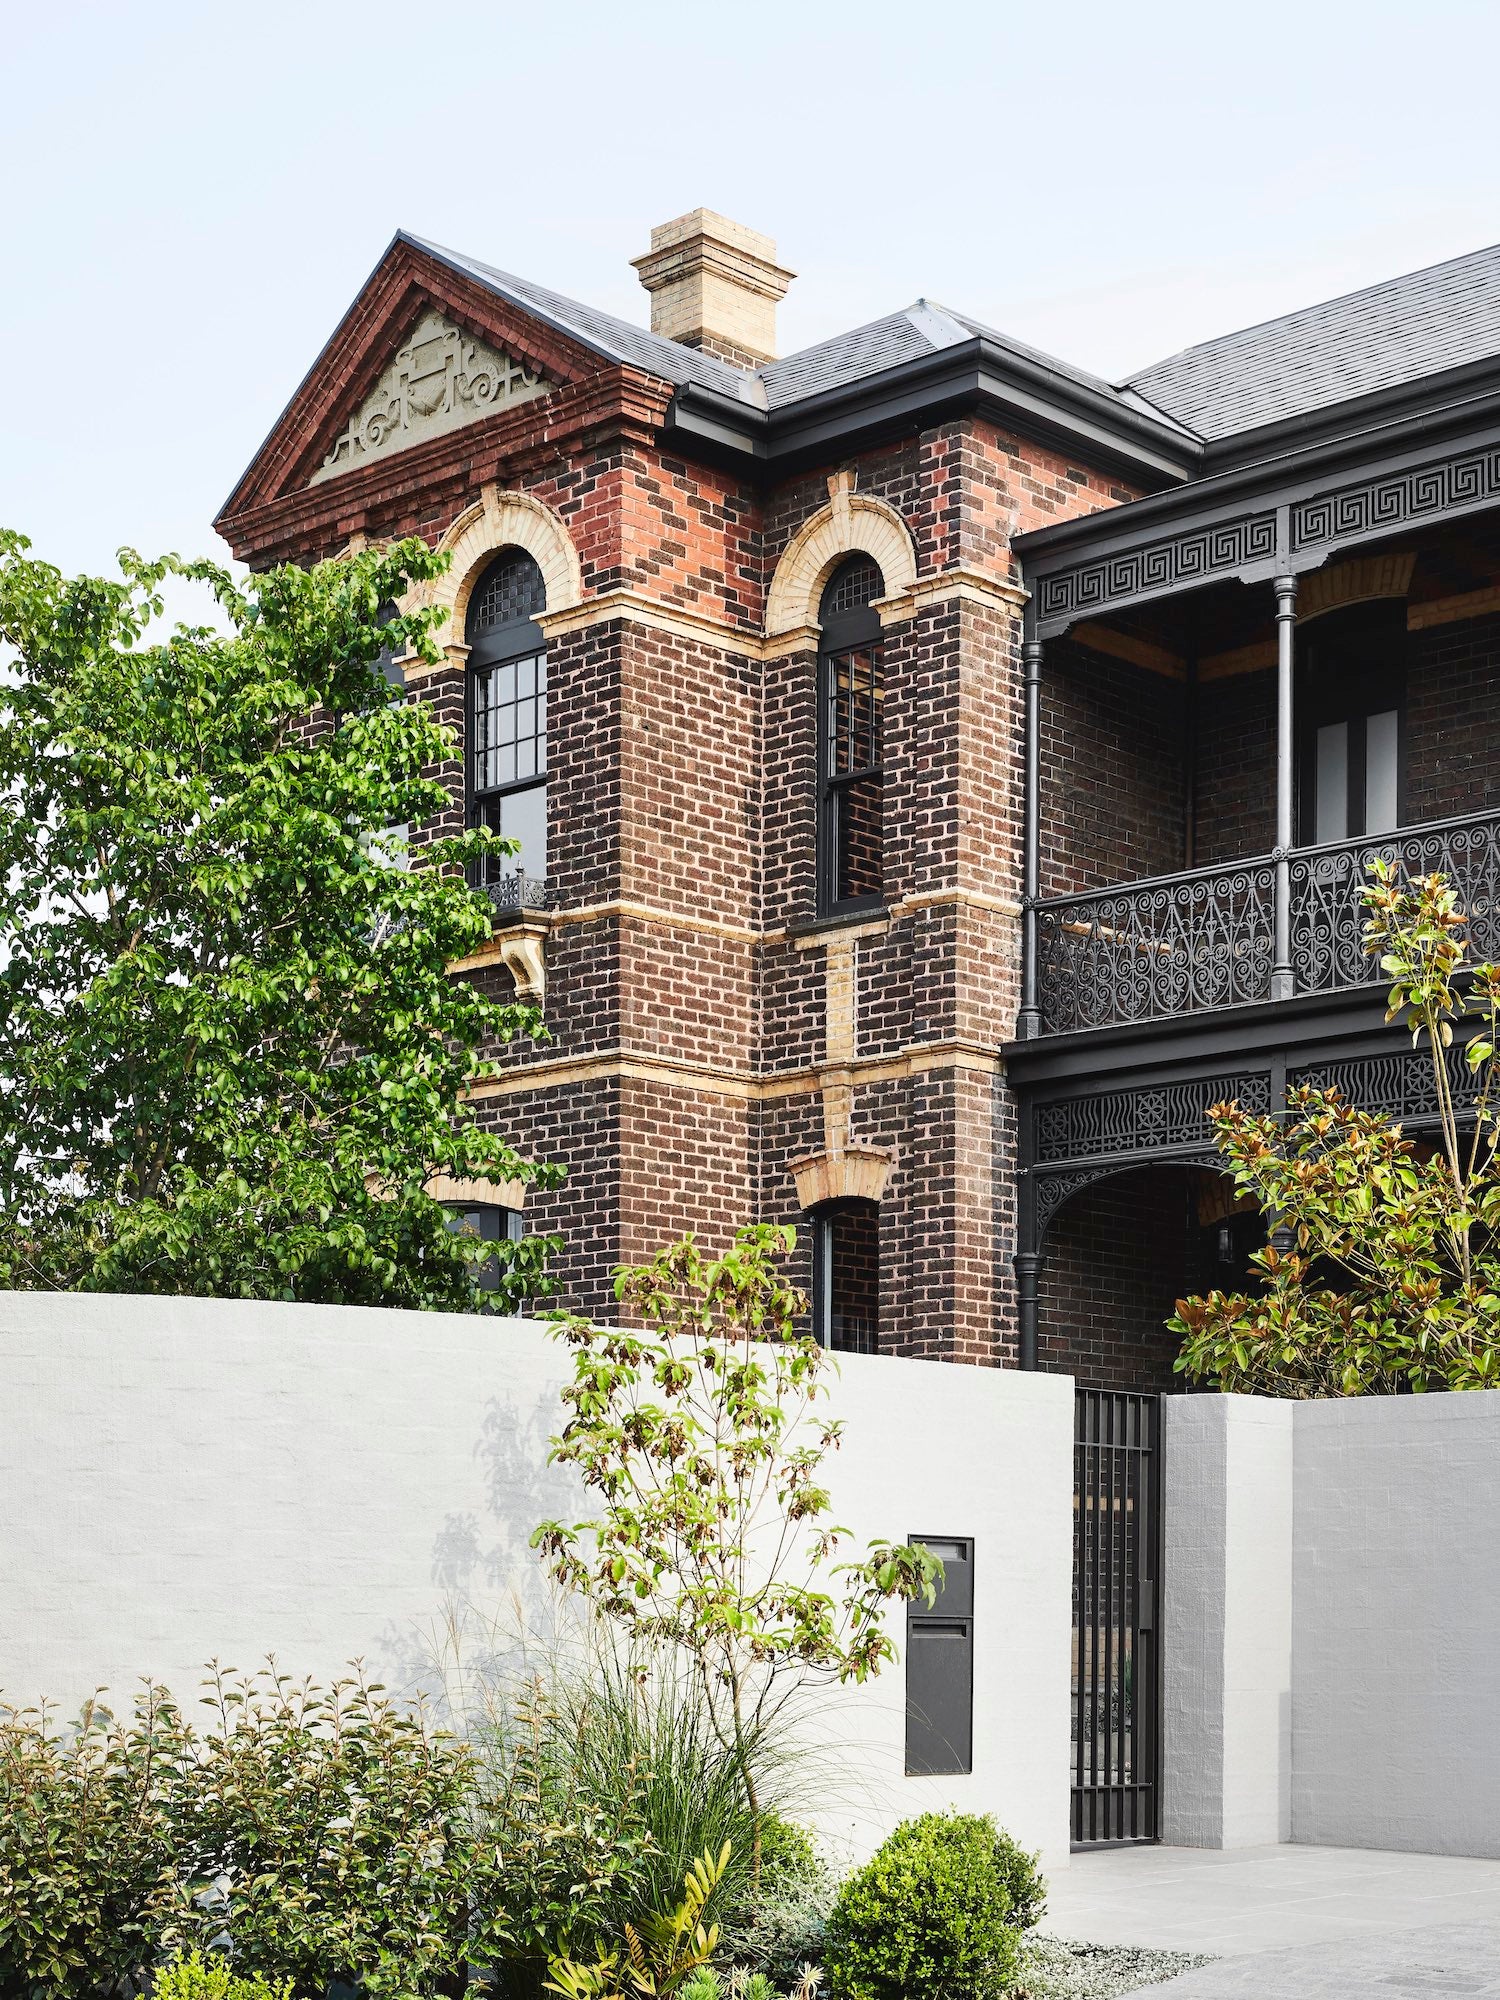 A brick armadale house with a fence and a gate.